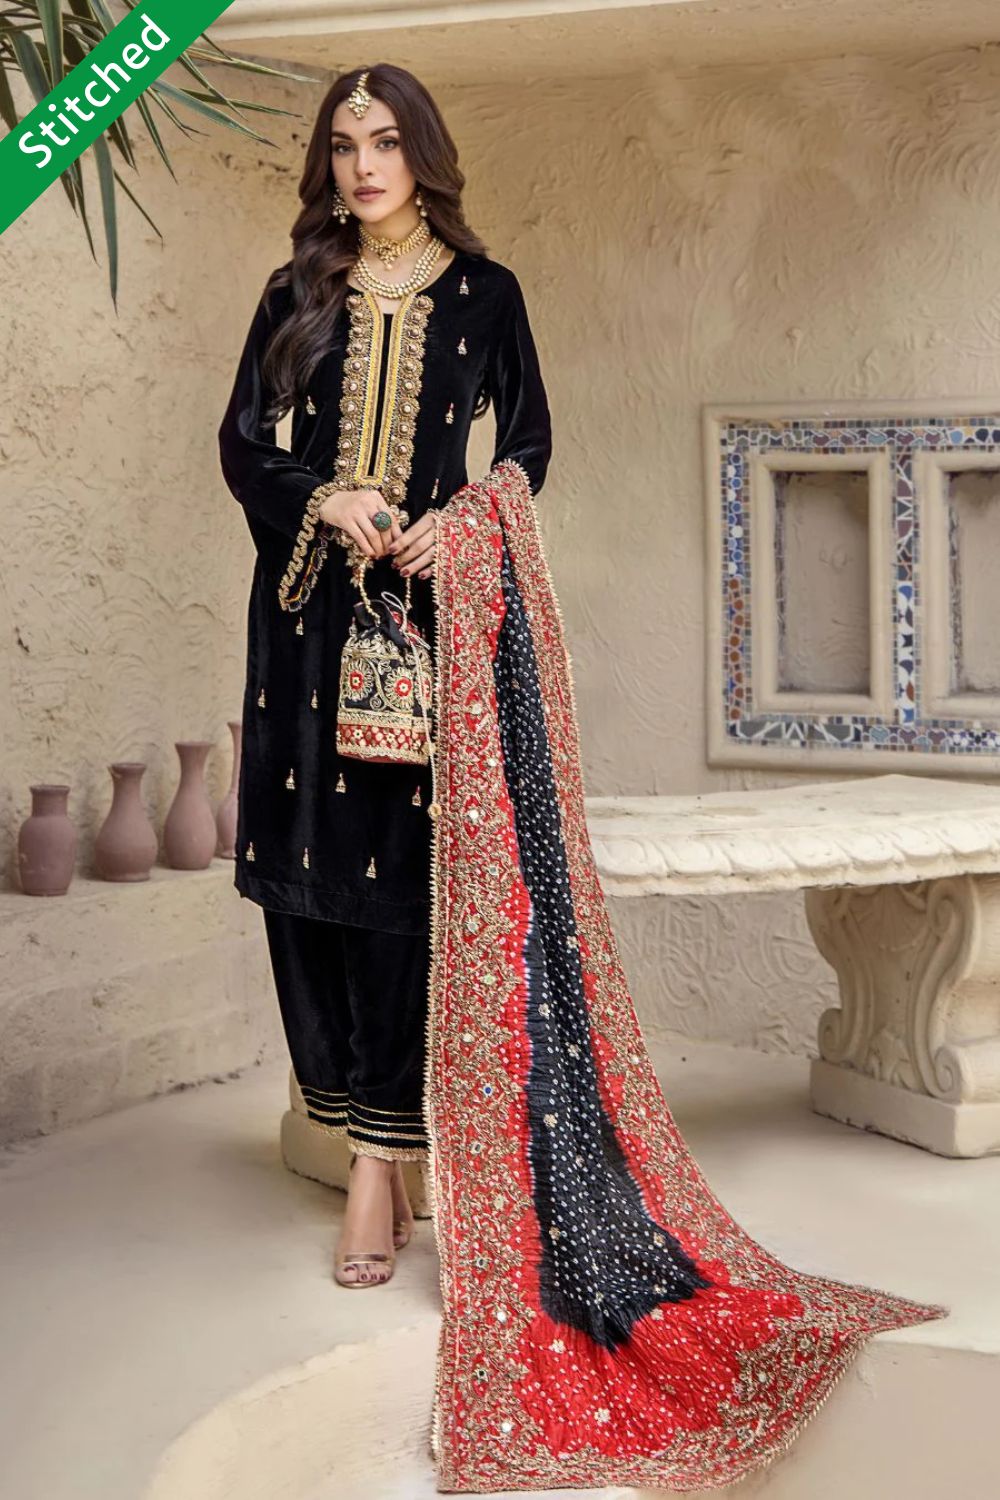 SPARSH BY VIRASAT LATEST EXCLUSIVE GORGEOUS DASHING DESIGNER LONG GOWN  STYLE JACQUARD WEDDING AND PARTY WEAR READYMADE SUITS FOR WOMEN BUY ONLINE  IN INDIA MAURITIUS USA - Reewaz International | Wholesaler &